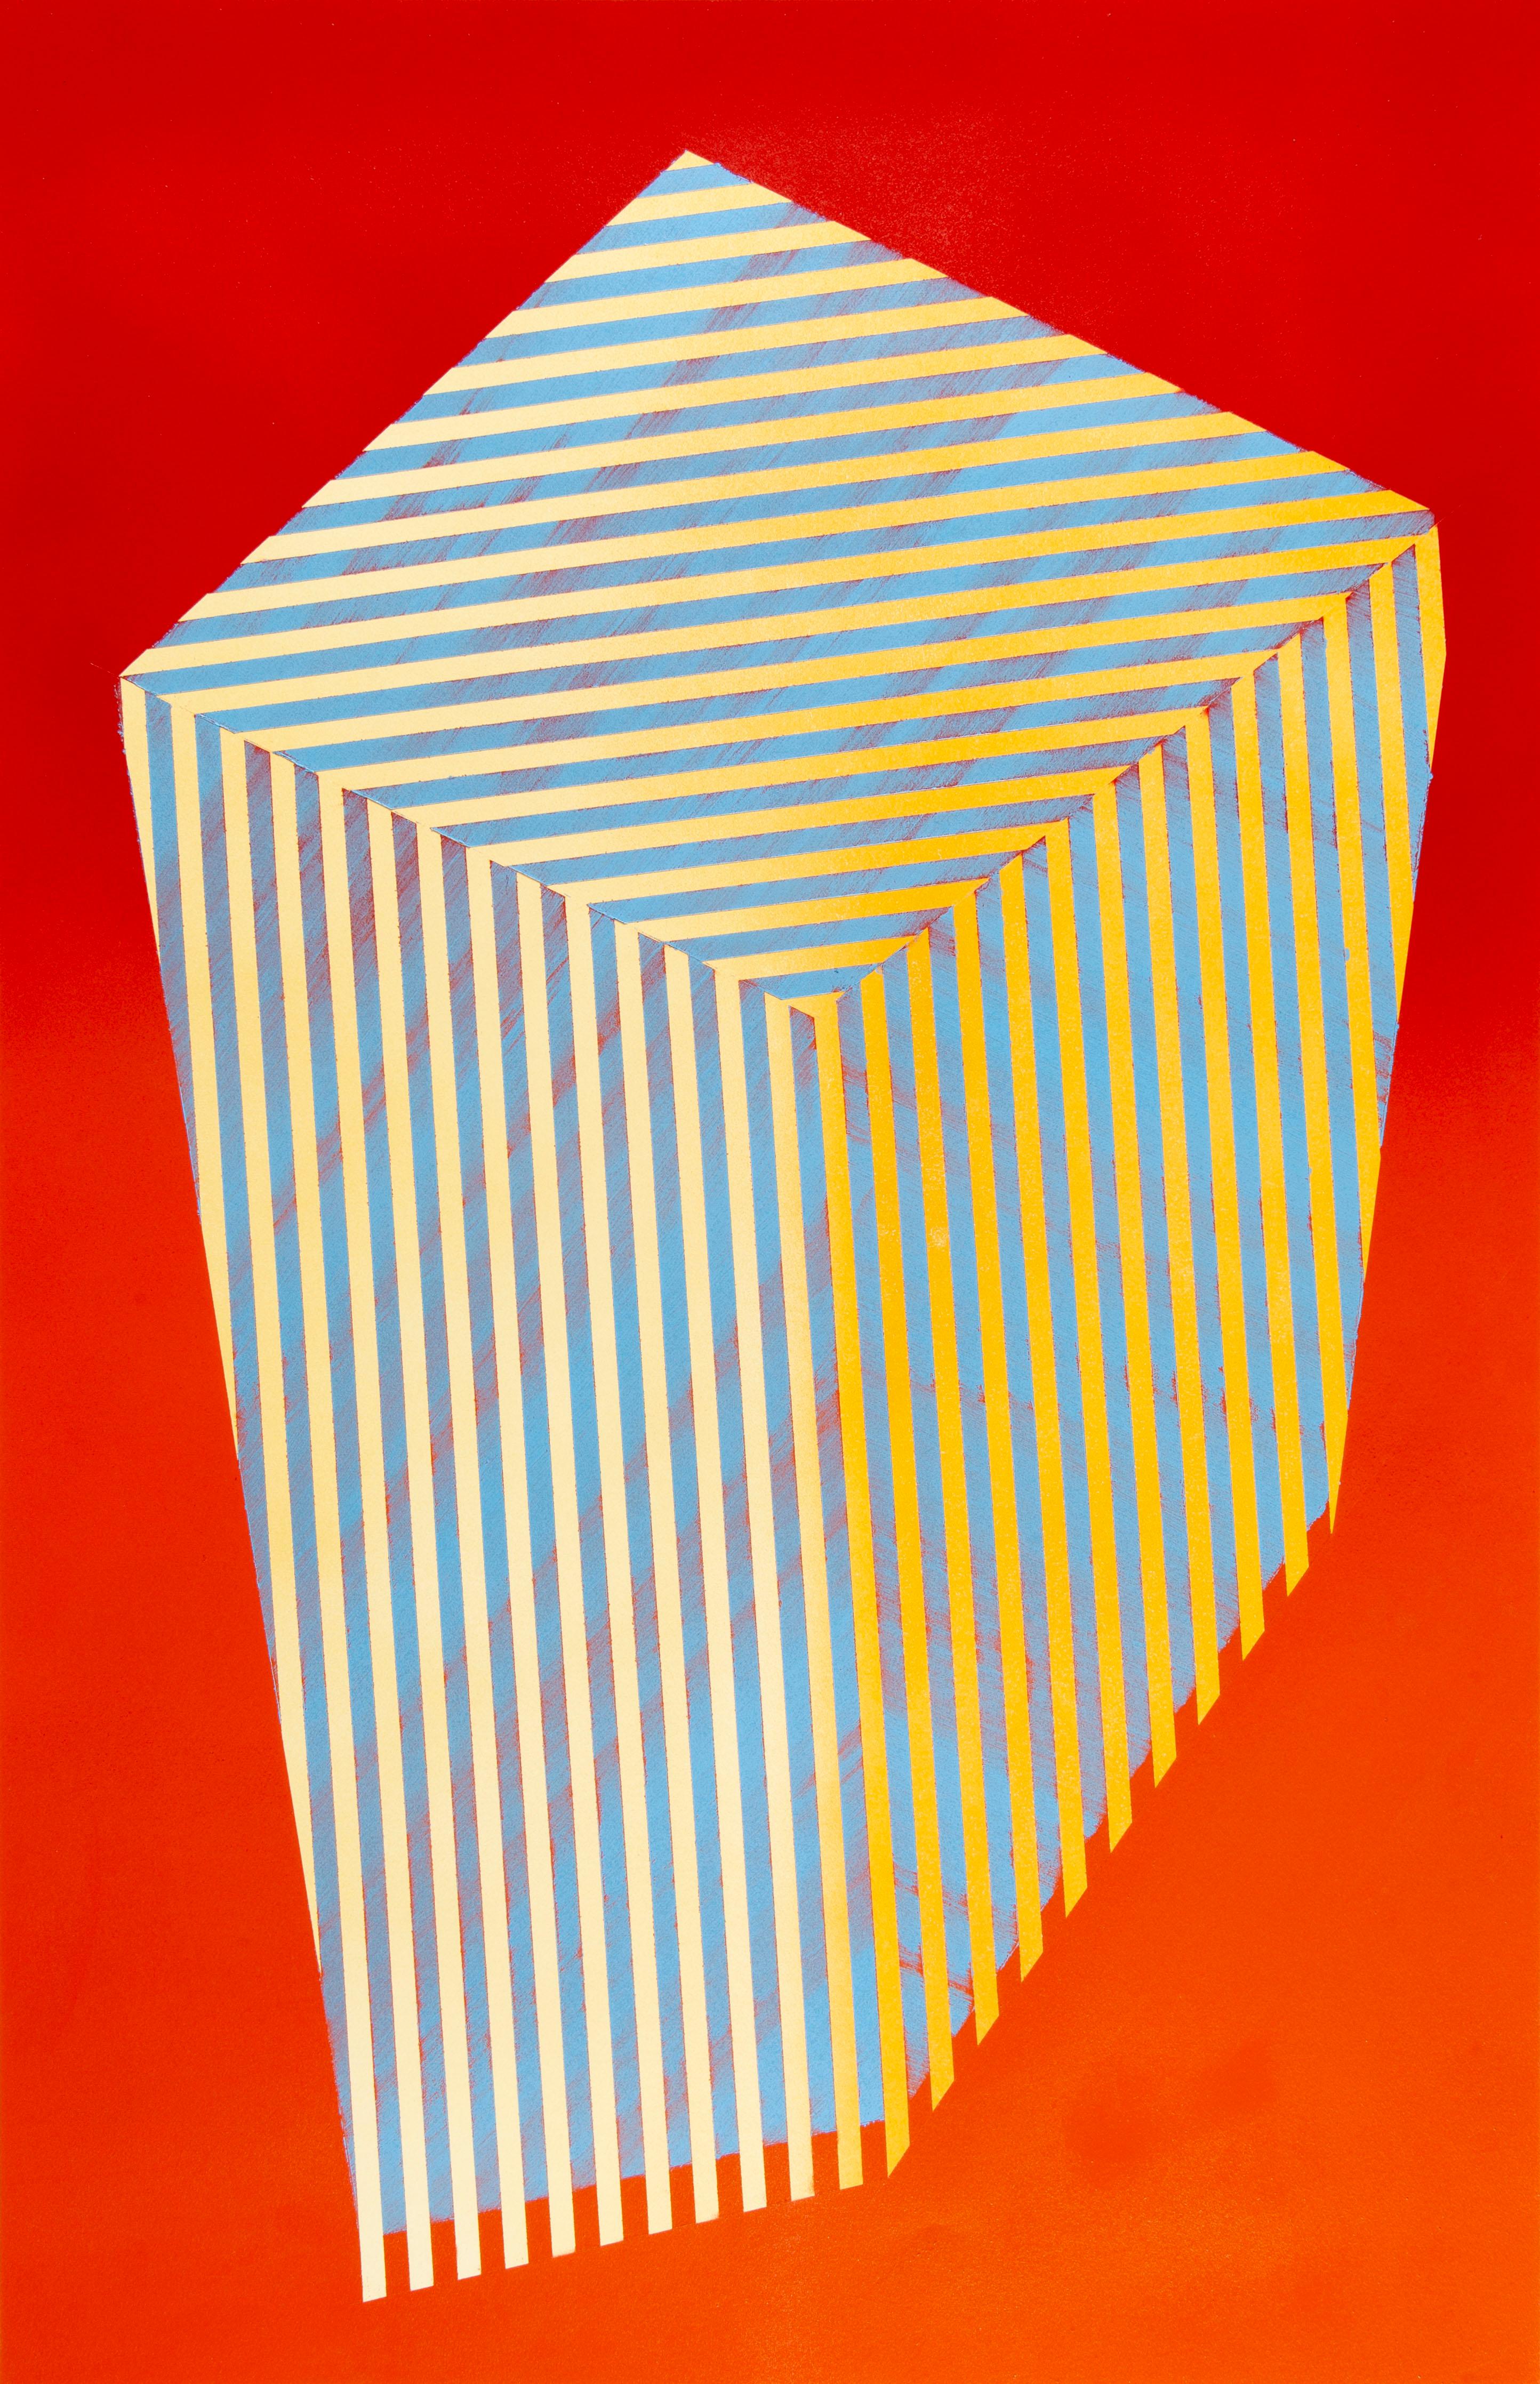 Jay Walker Figurative Painting - Prismatic Polygon XXIII: geometric abstract painting - red orange, blue, yellow 